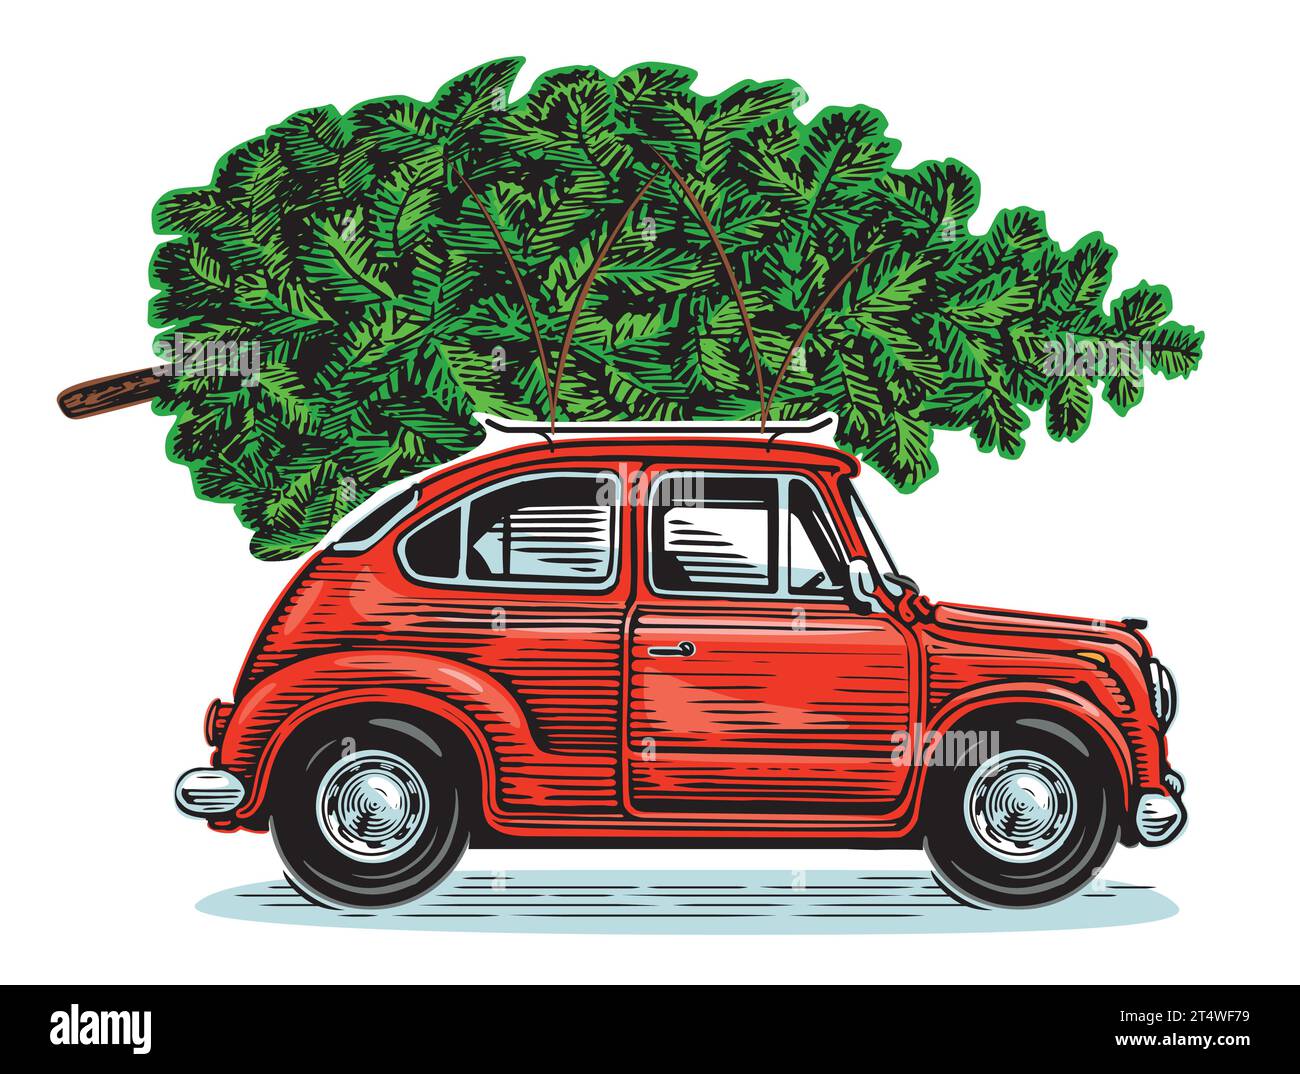 Christmas red retro car with green pine tree. Happy holidays vector illustration Stock Vector